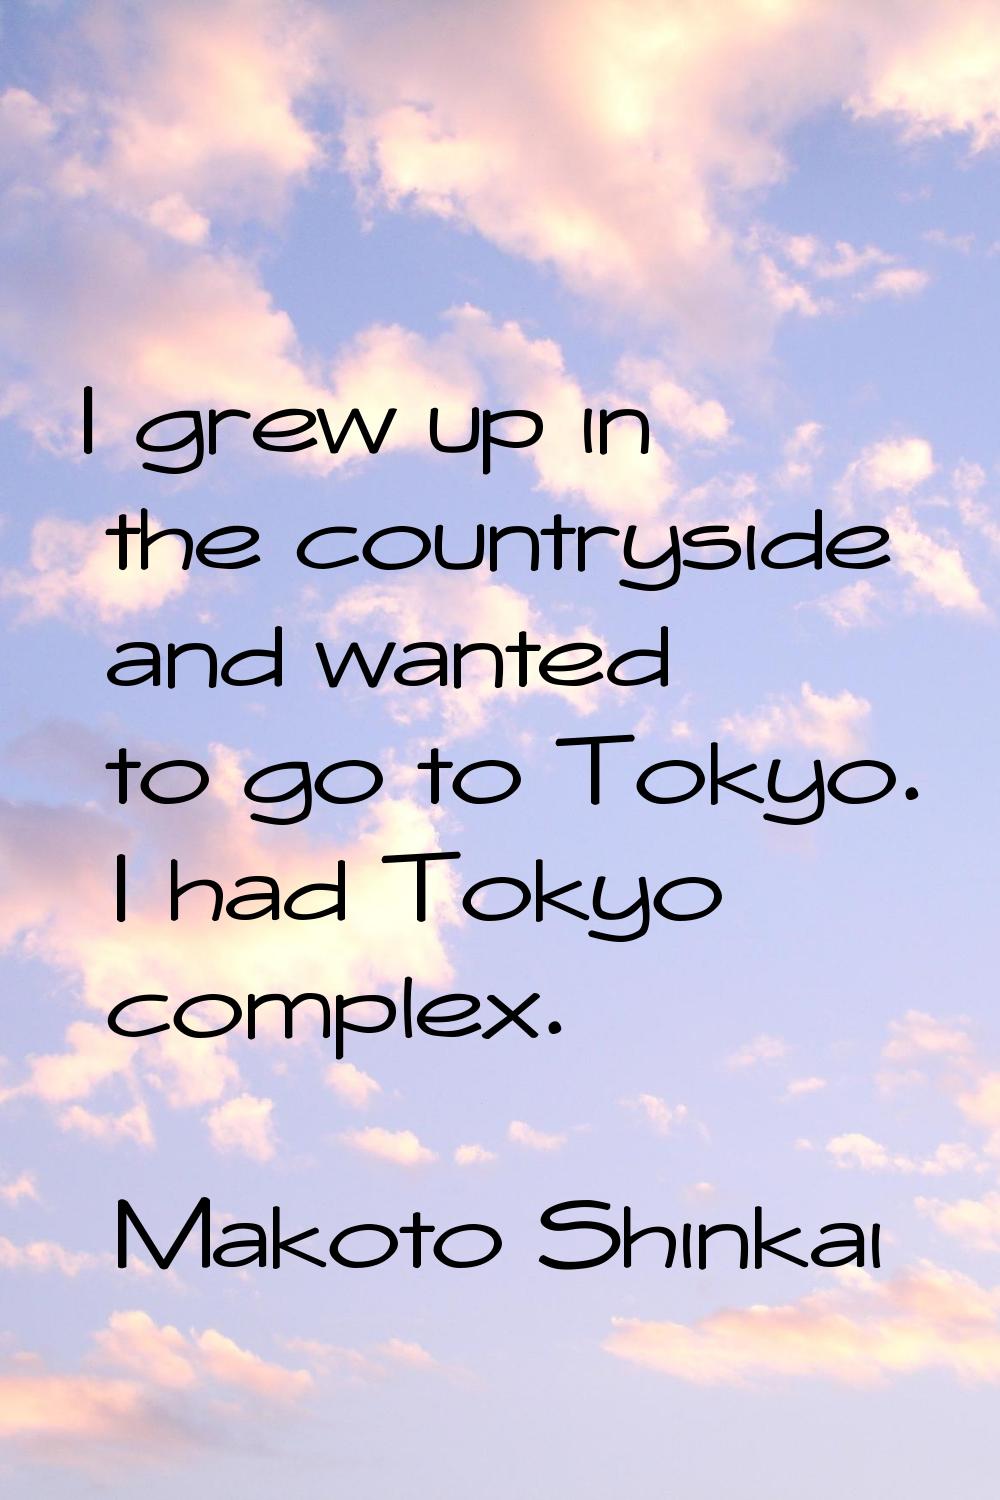 I grew up in the countryside and wanted to go to Tokyo. I had Tokyo complex.